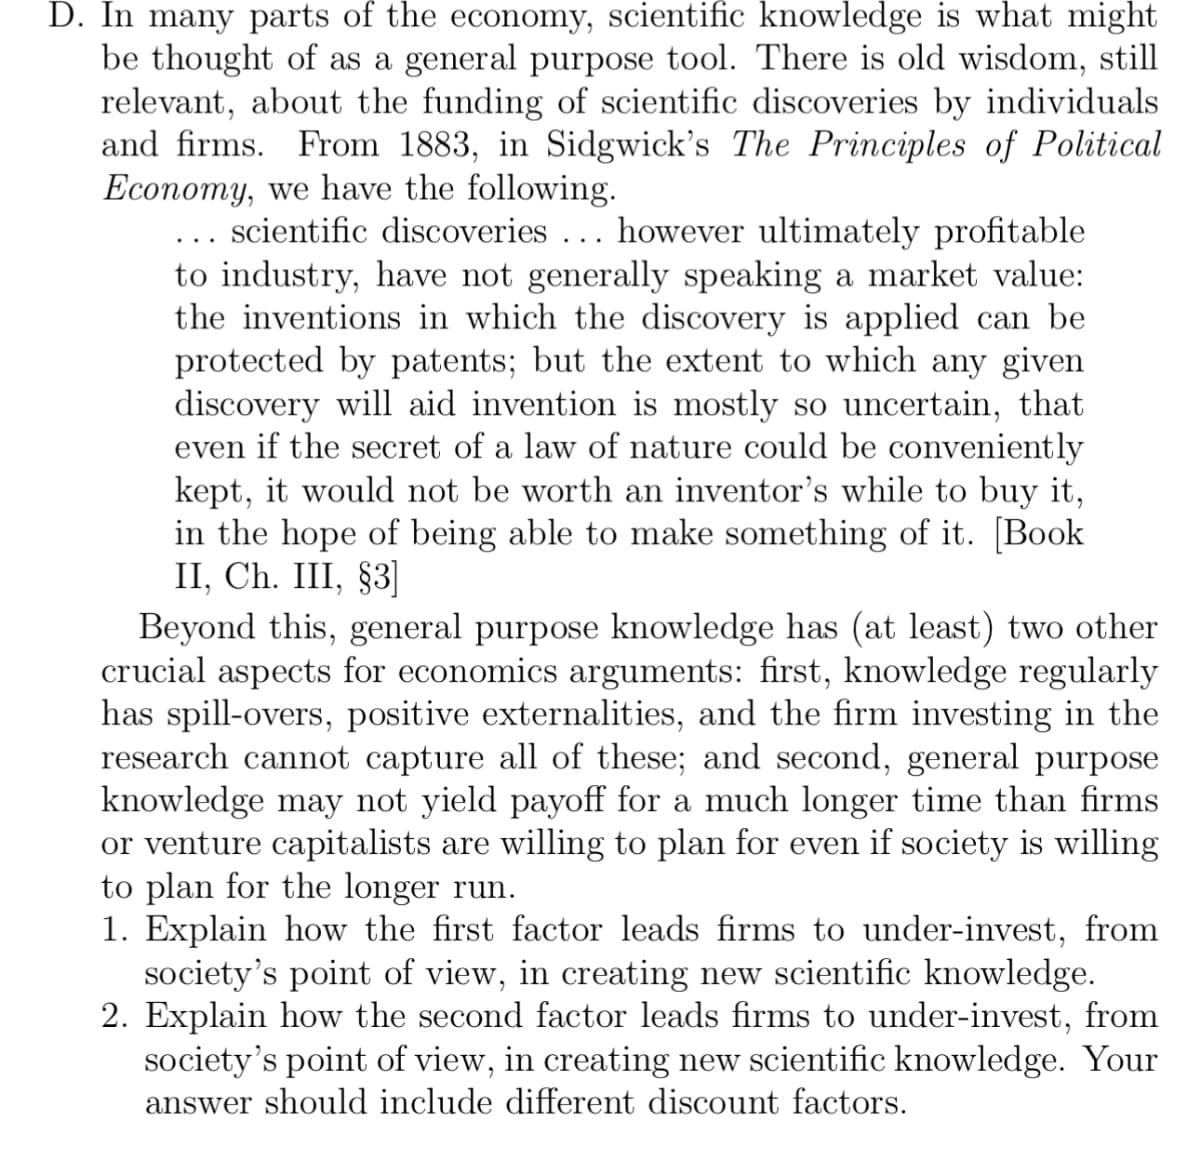 D. In many parts of the economy, scientific knowledge is what might
be thought of as a general purpose tool. There is old wisdom, still
relevant, about the funding of scientific discoveries by individuals
and firms. From 1883, in Sidgwick's The Principles of Political
Economy, we have the following.
scientific discoveries... however ultimately profitable
to industry, have not generally speaking a market value:
the inventions in which the discovery is applied can be
protected by patents; but the extent to which any given
discovery will aid invention is mostly so uncertain, that
even if the secret of a law of nature could be conveniently
kept, it would not be worth an inventor's while to buy it,
in the hope of being able to make something of it. [Book
II, Ch. III, §3]
Beyond this, general purpose knowledge has (at least) two other
crucial aspects for economics arguments: first, knowledge regularly
has spill-overs, positive externalities, and the firm investing in the
research cannot capture all of these; and second, general purpose
knowledge may not yield payoff for a much longer time than firms
or venture capitalists are willing to plan for even if society is willing
to plan for the longer run.
1. Explain how the first factor leads firms to under-invest, from
society's point of view, in creating new scientific knowledge.
2. Explain how the second factor leads firms to under-invest, from
society's point of view, in creating new scientific knowledge. Your
answer should include different discount factors.